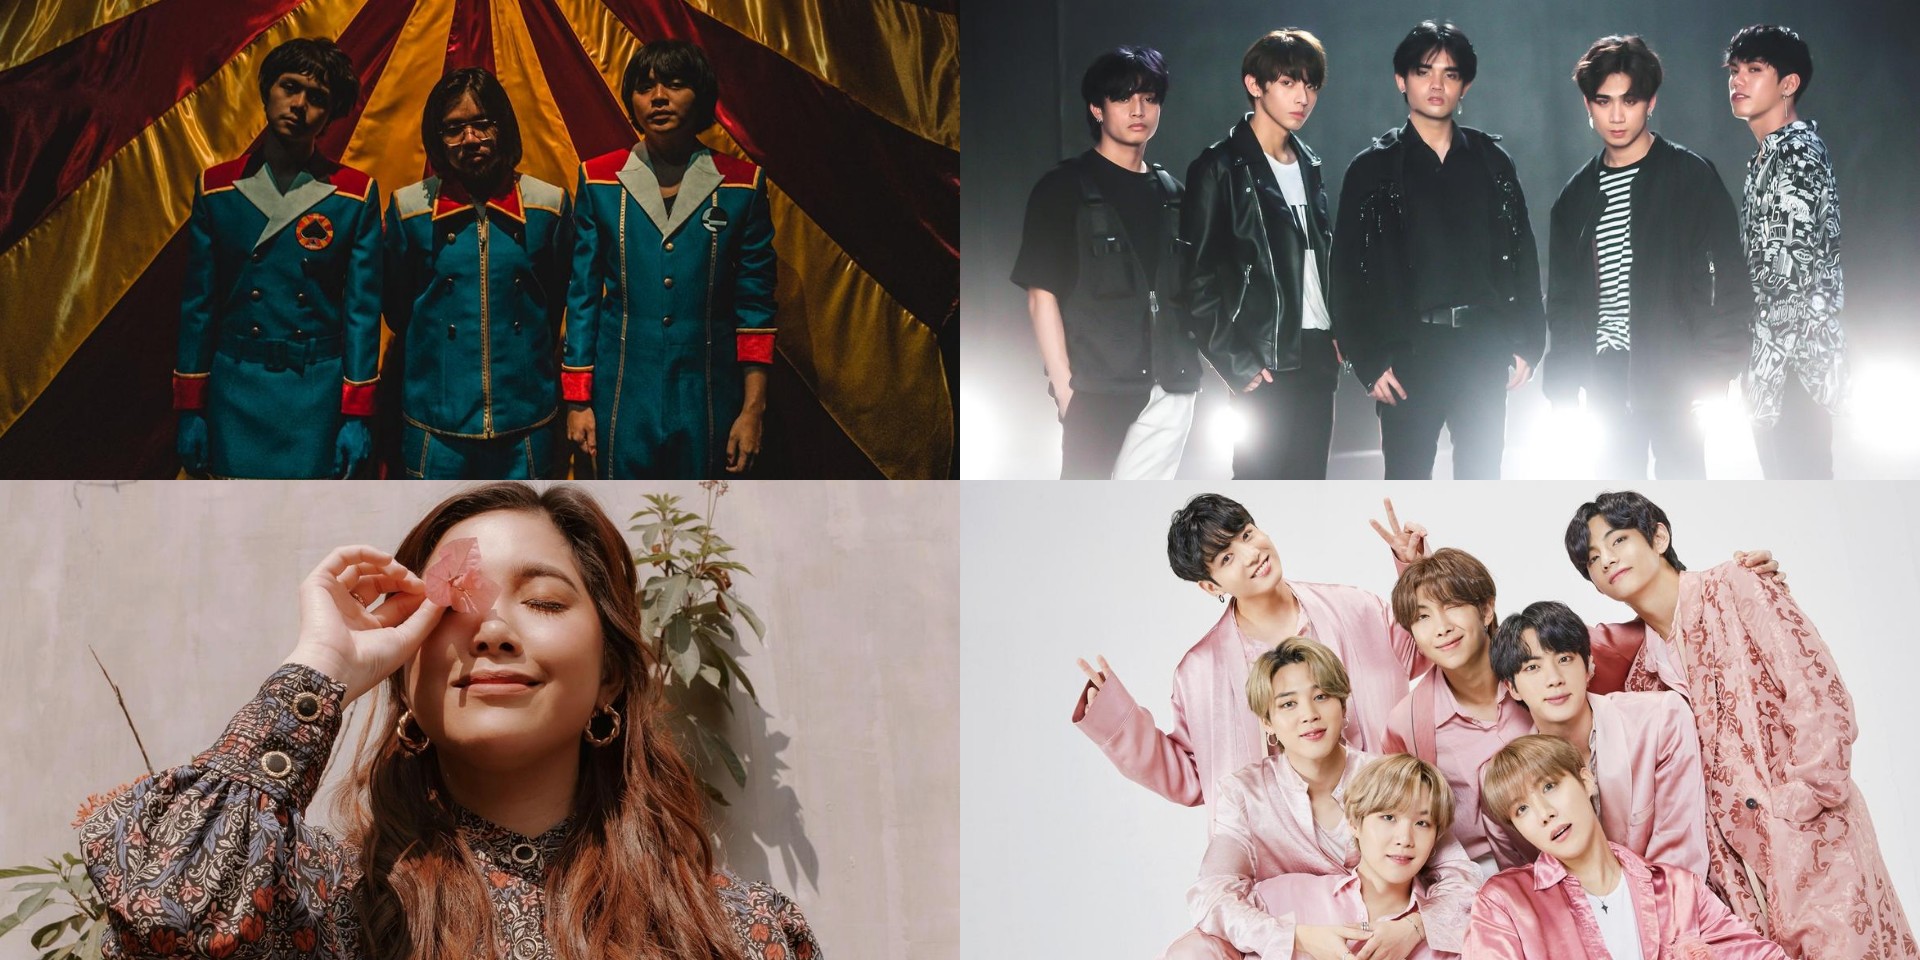 SB19, Moira, IV of Spades, BTS, and more win at the 2020 MYX Awards